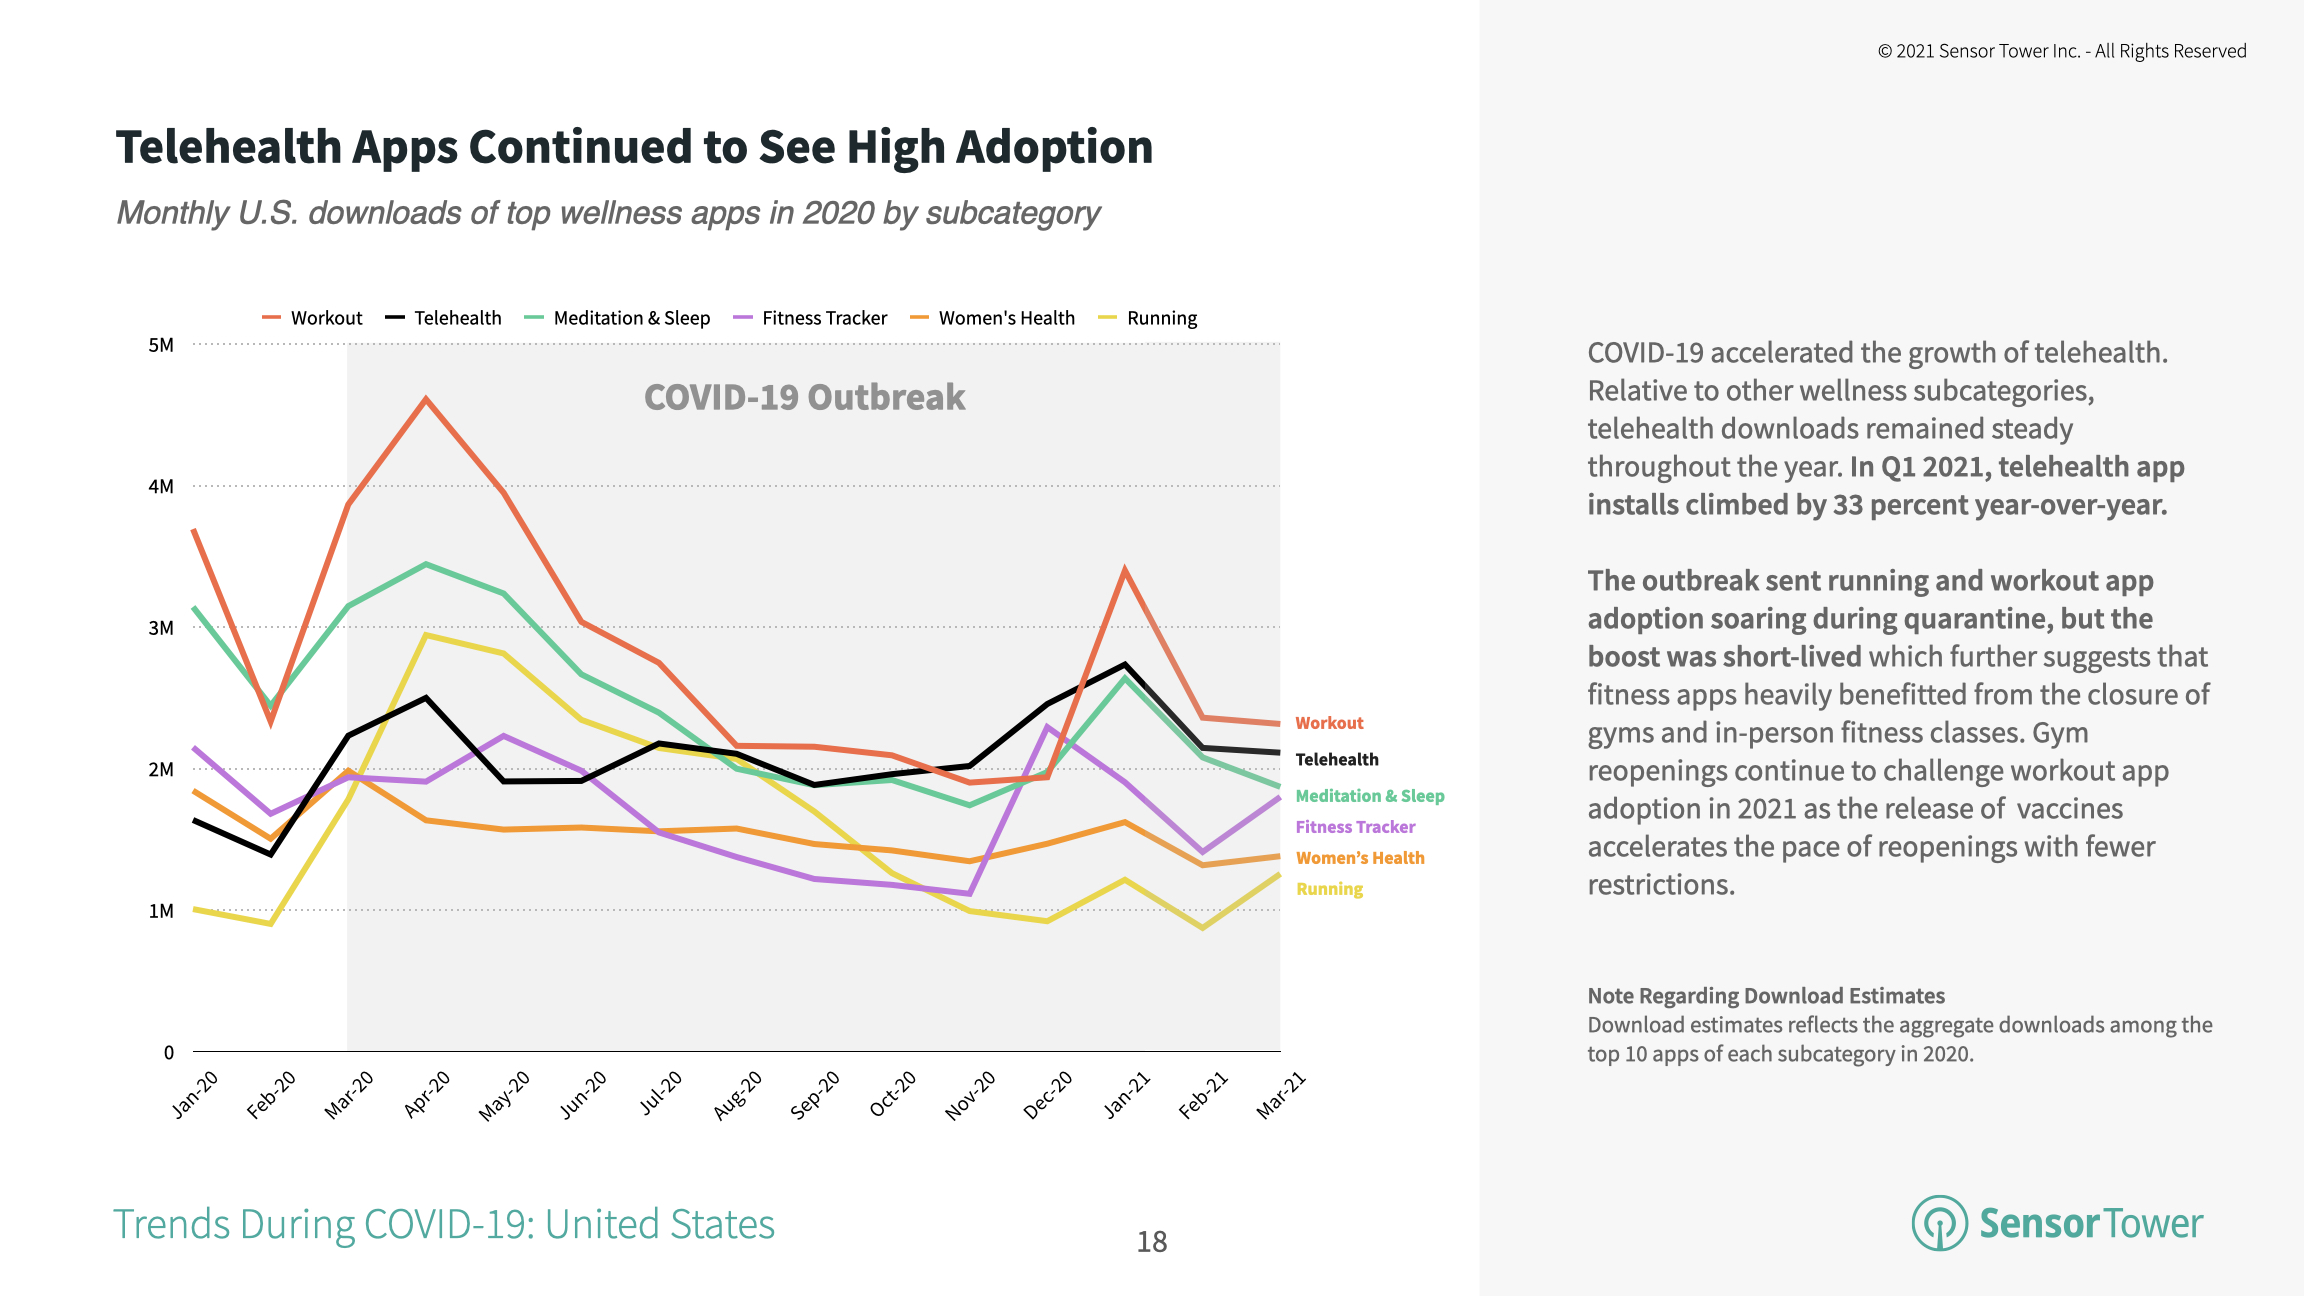 Telehealth adoption has remained consistently elevated since the beginning of the COVID-19 pandemic.